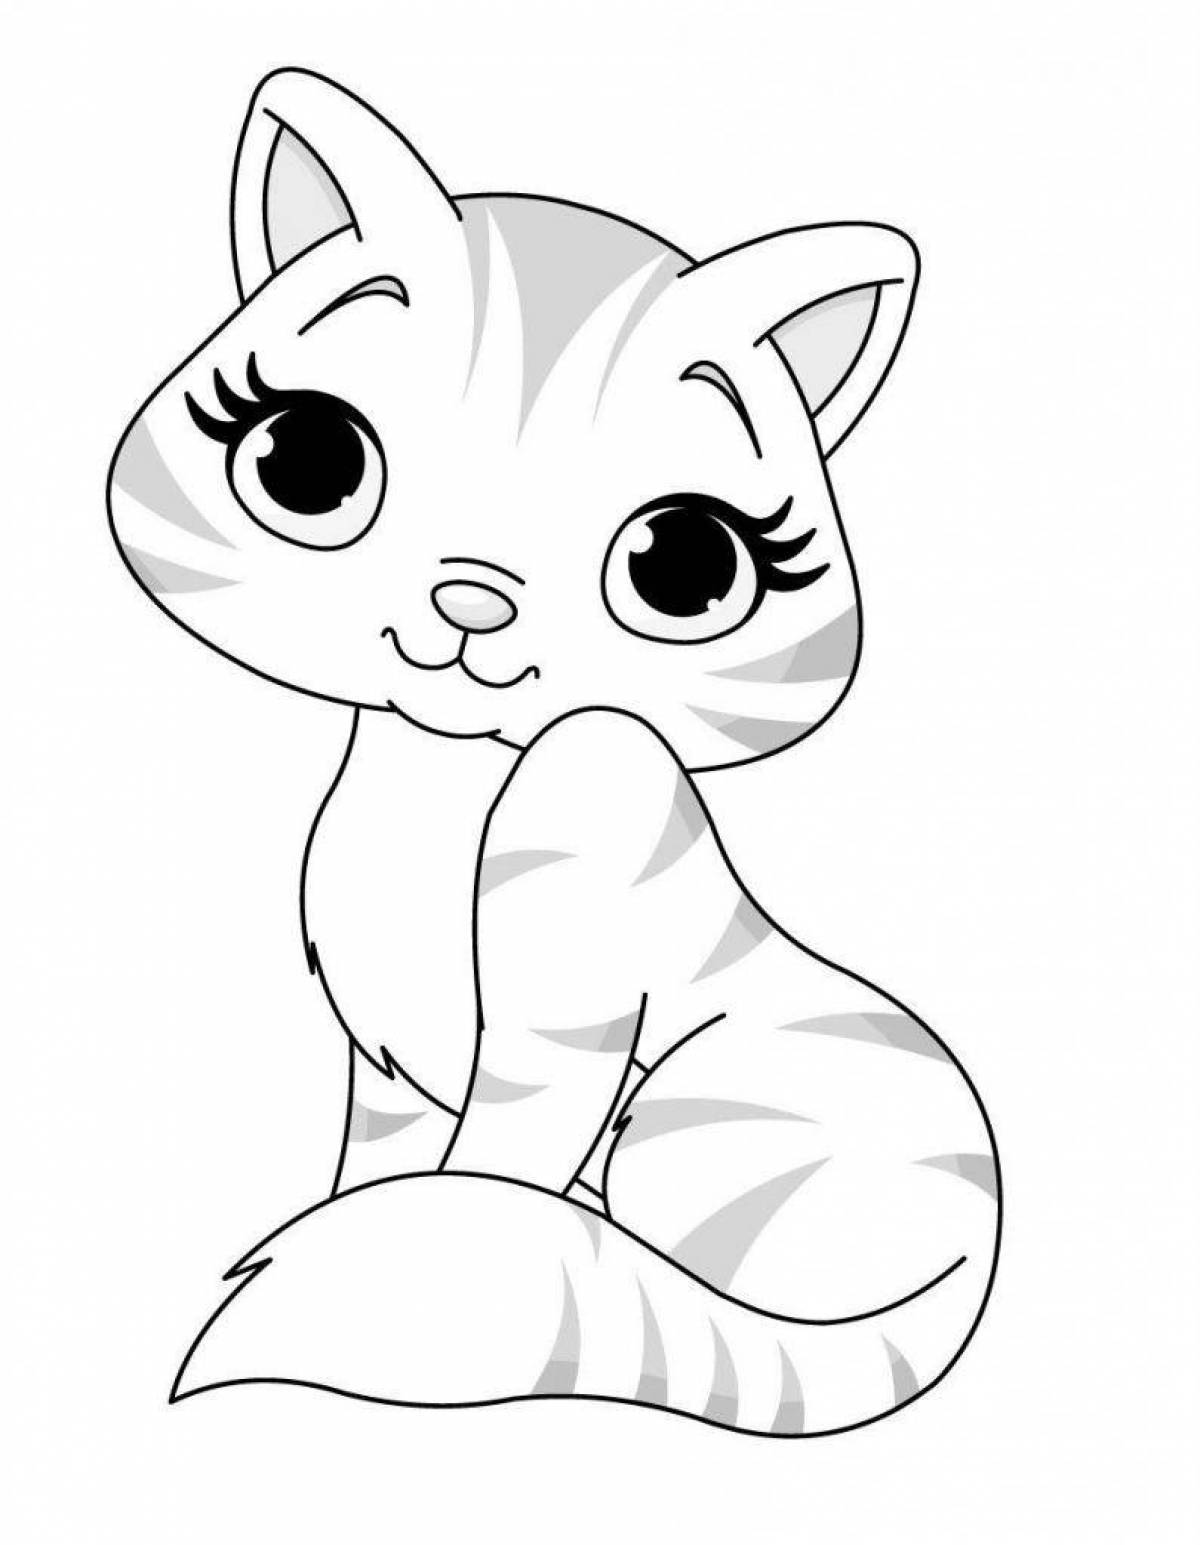 Coloring page cute and sly cat